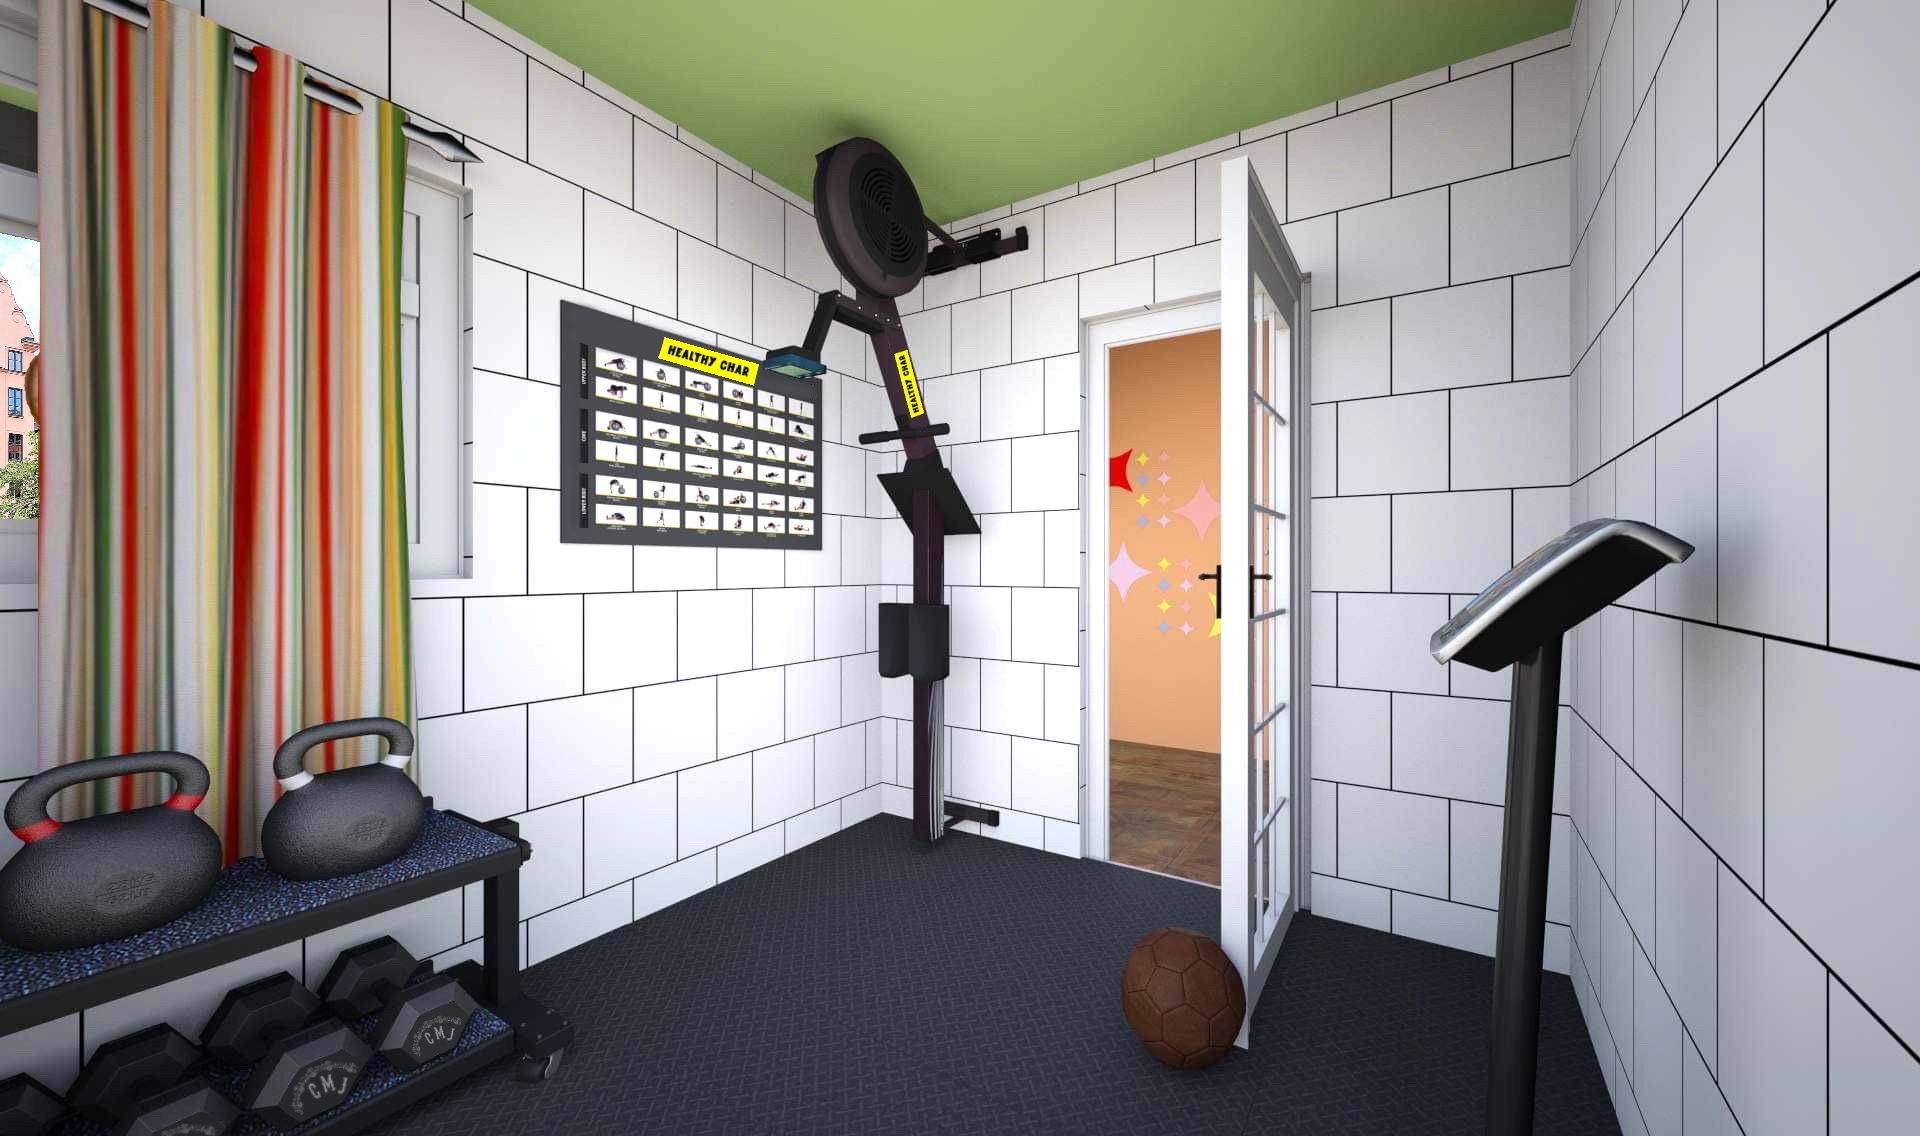 INT. SMALL HOME GYM 2 OPEN DOOR – DAY